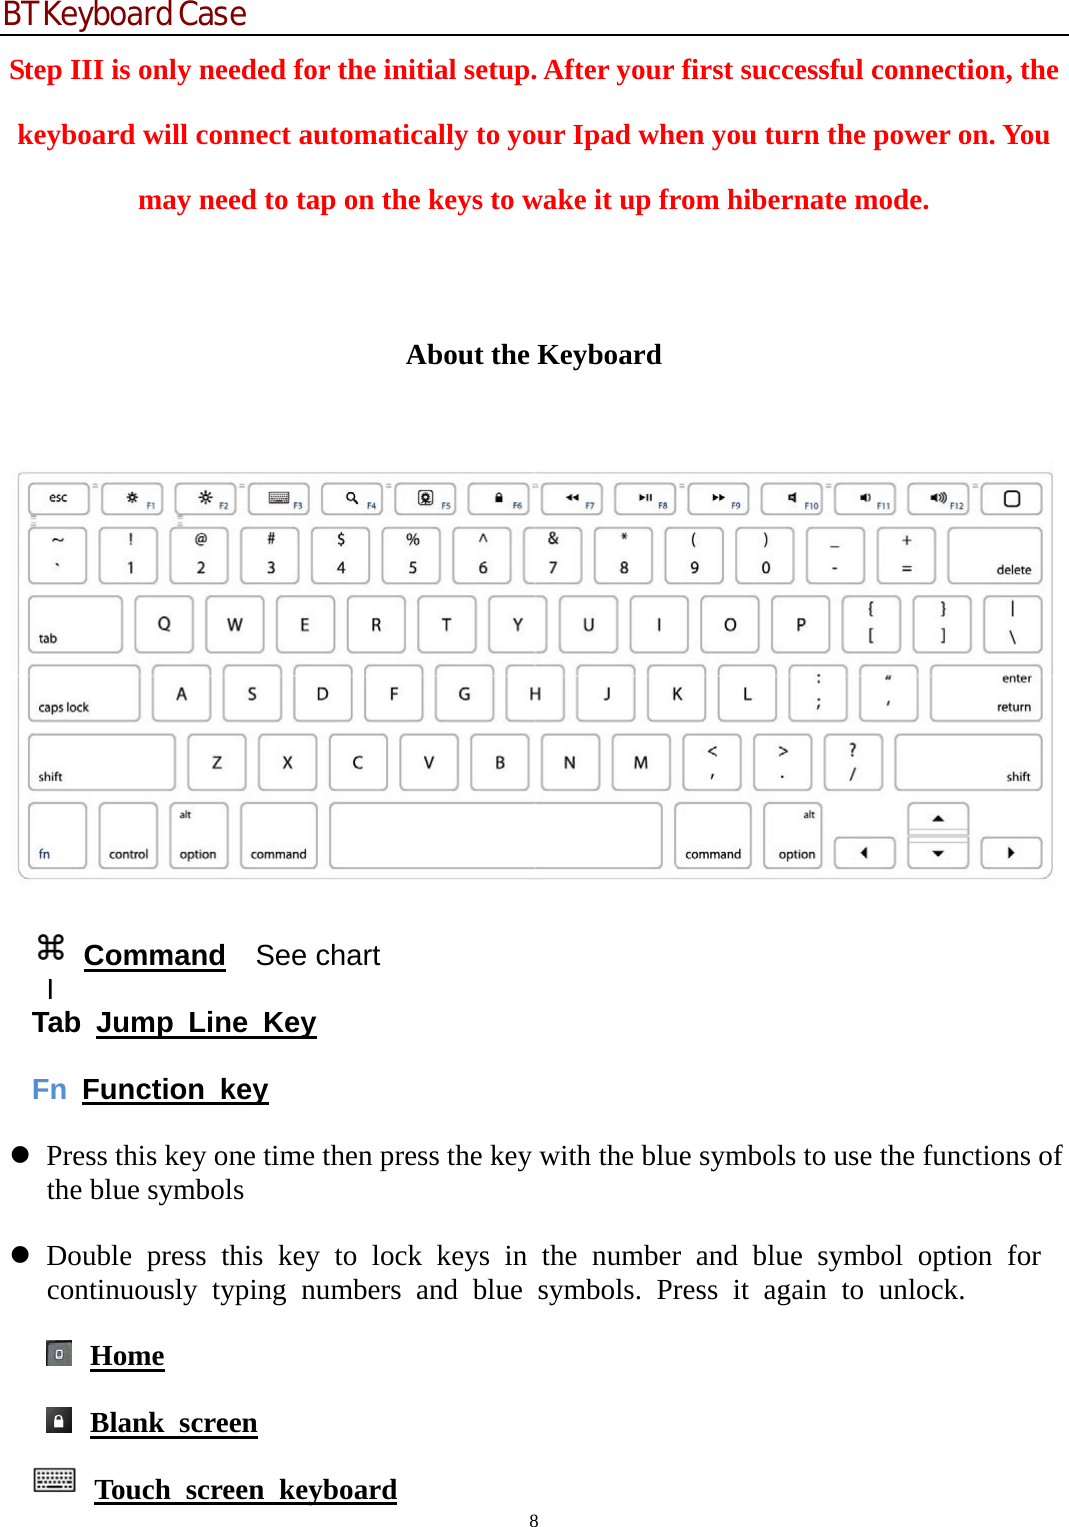 BT Keyboard Case 8  Step III is only needed for the initial setup. After your first successful connection, the keyboard will connect automatically to your Ipad when you turn the power on. You may need to tap on the keys to wake it up from hibernate mode.  About the Keyboard       Command  See chart   I Tab Jump Line Key   Fn  Function key   z Press this key one time then press the key with the blue symbols to use the functions of the blue symbols  z Double press this key to lock keys in the number and blue symbol option for continuously typing numbers and blue symbols. Press it again to unlock.   Home   Blank screen  Touch screen keyboard 